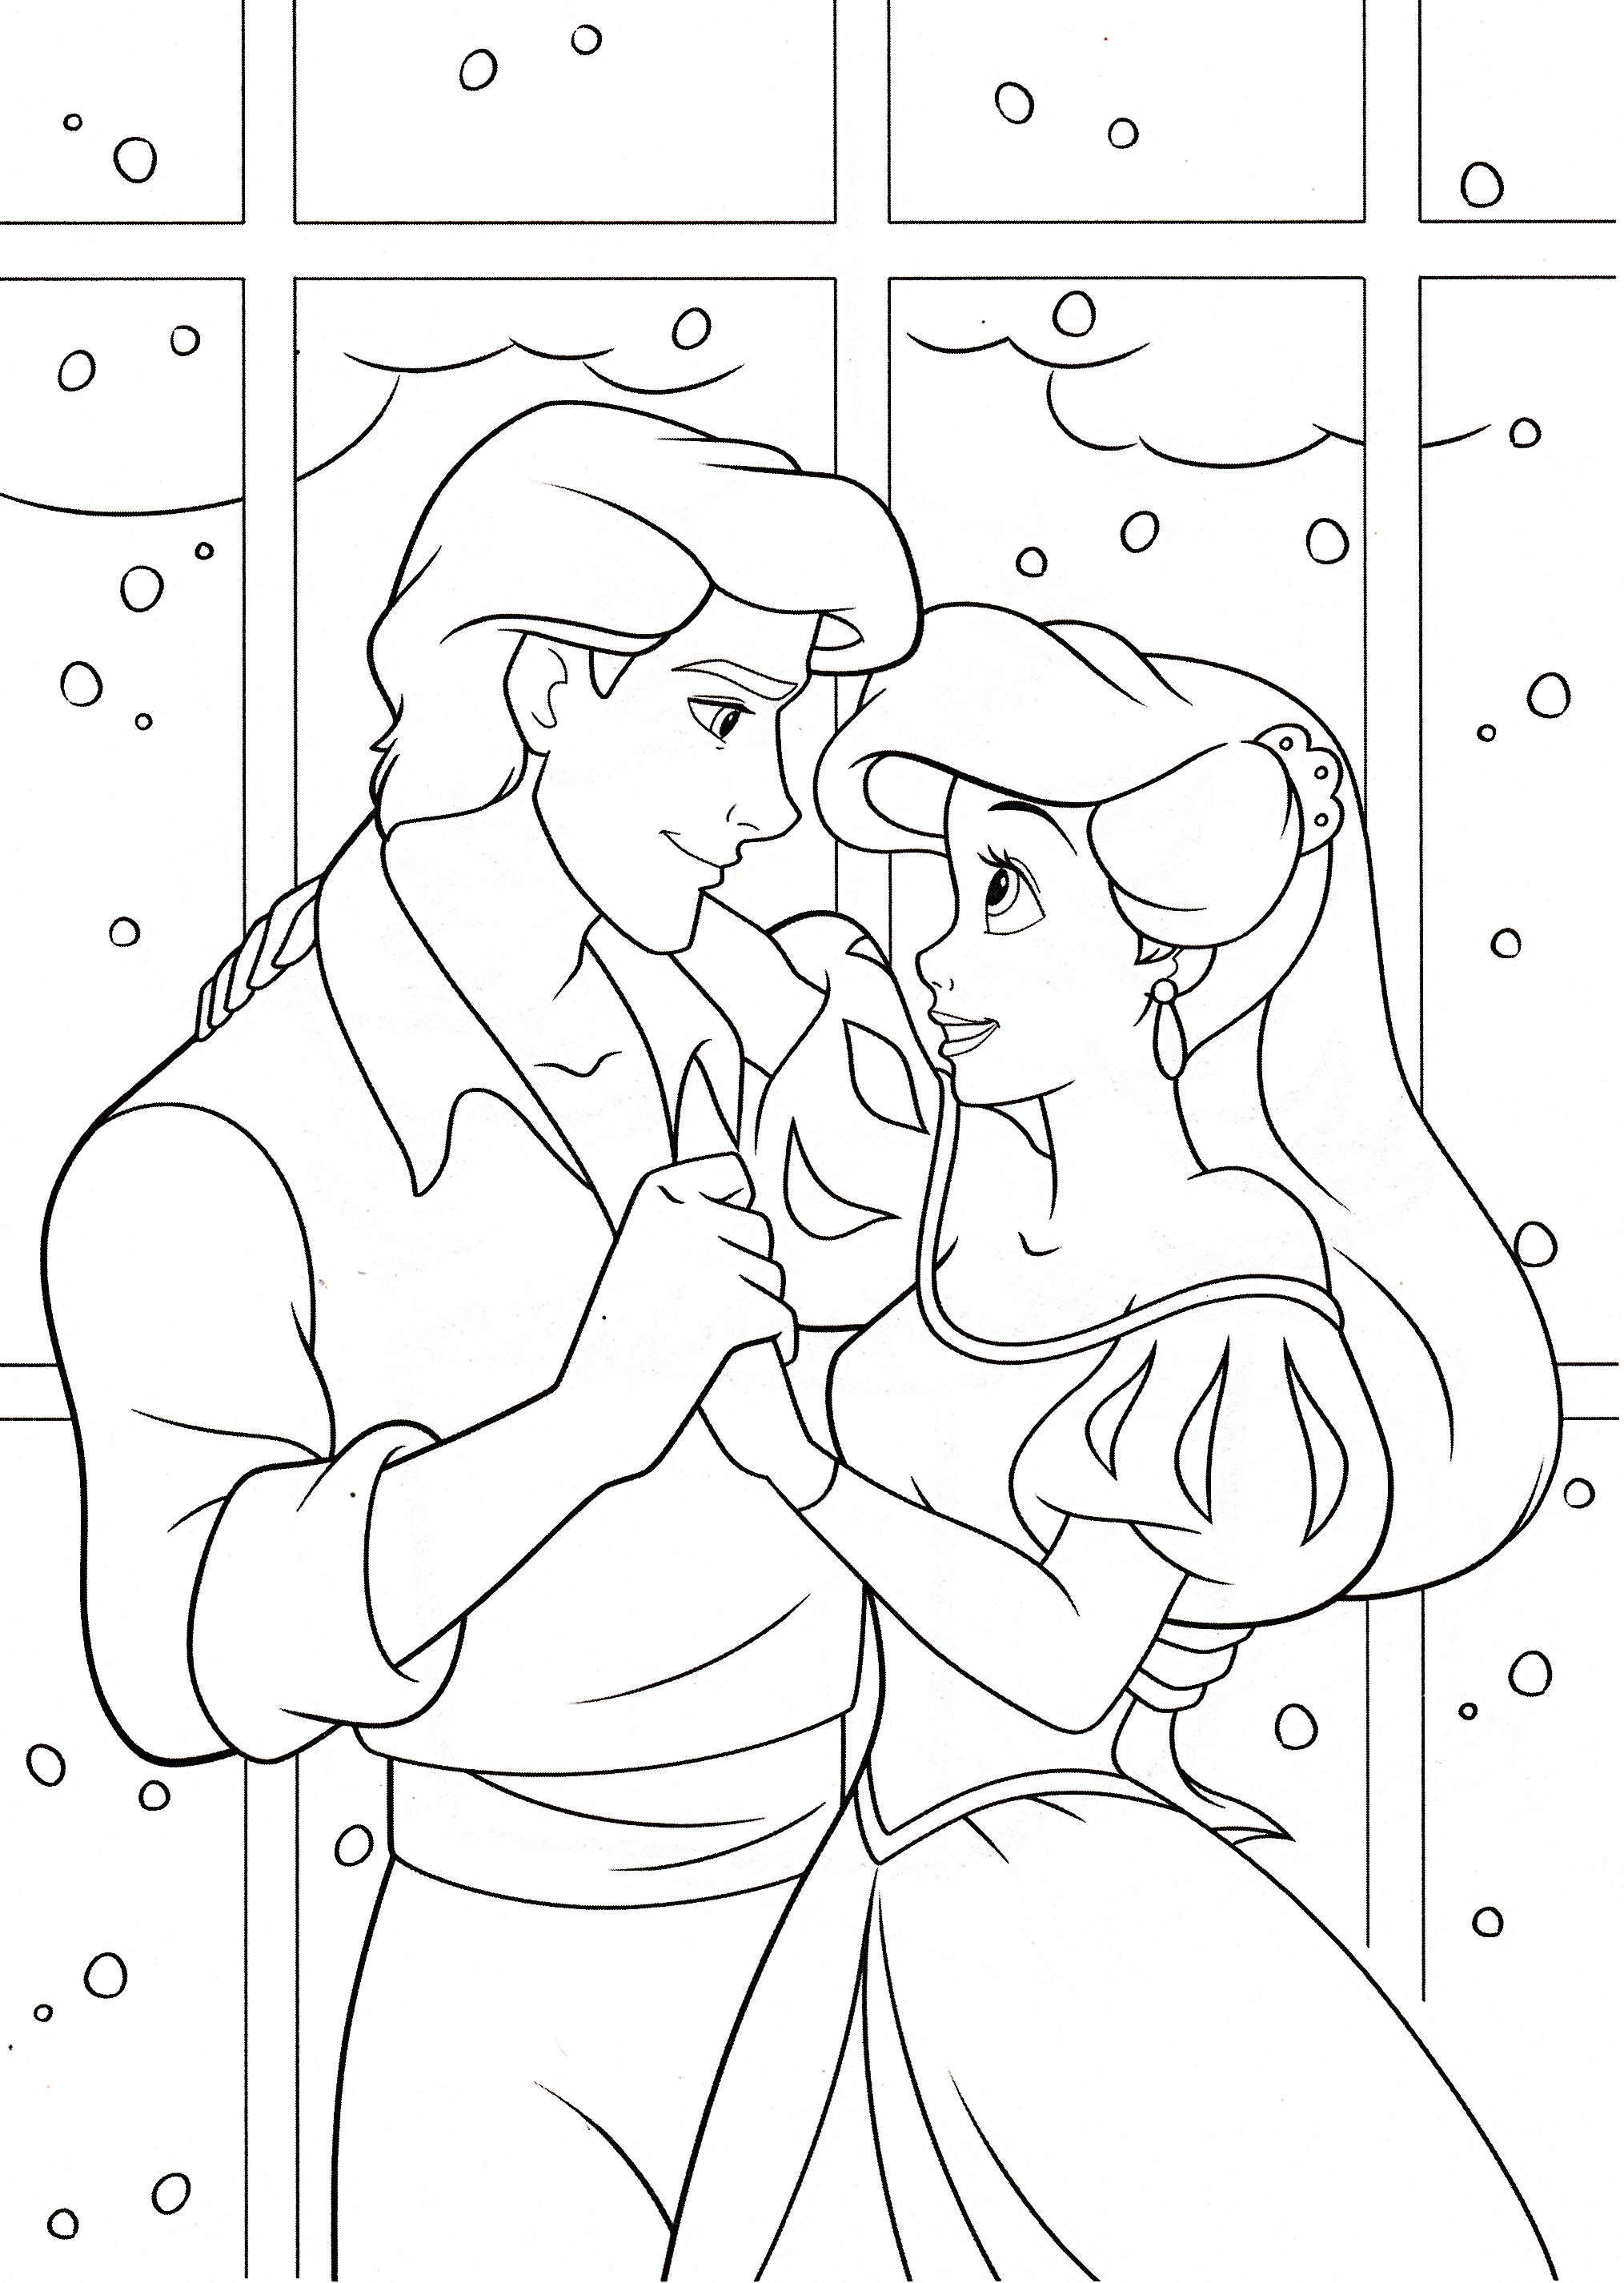 63 Collection Www.disney Coloring Pages.com Best